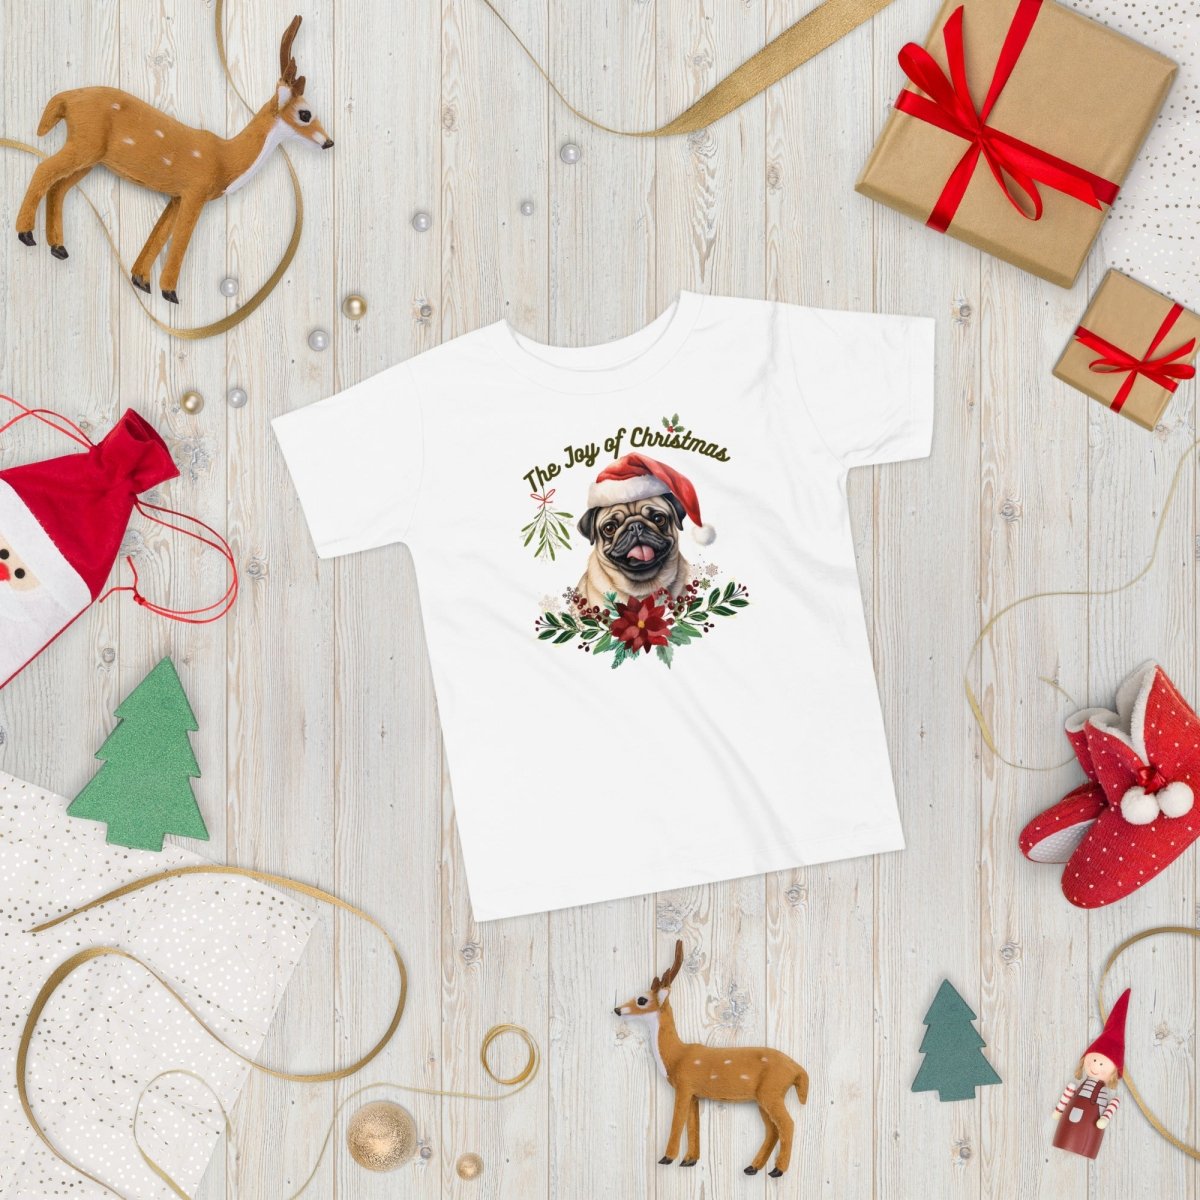 Christmas Pug T-Shirt - High Quality Festive Family Children T-Shirt, Gift for Her, Gift for Doglovers, Cute Xmas Dog Tee, Toddler Xmas Tee - Everything Pixel